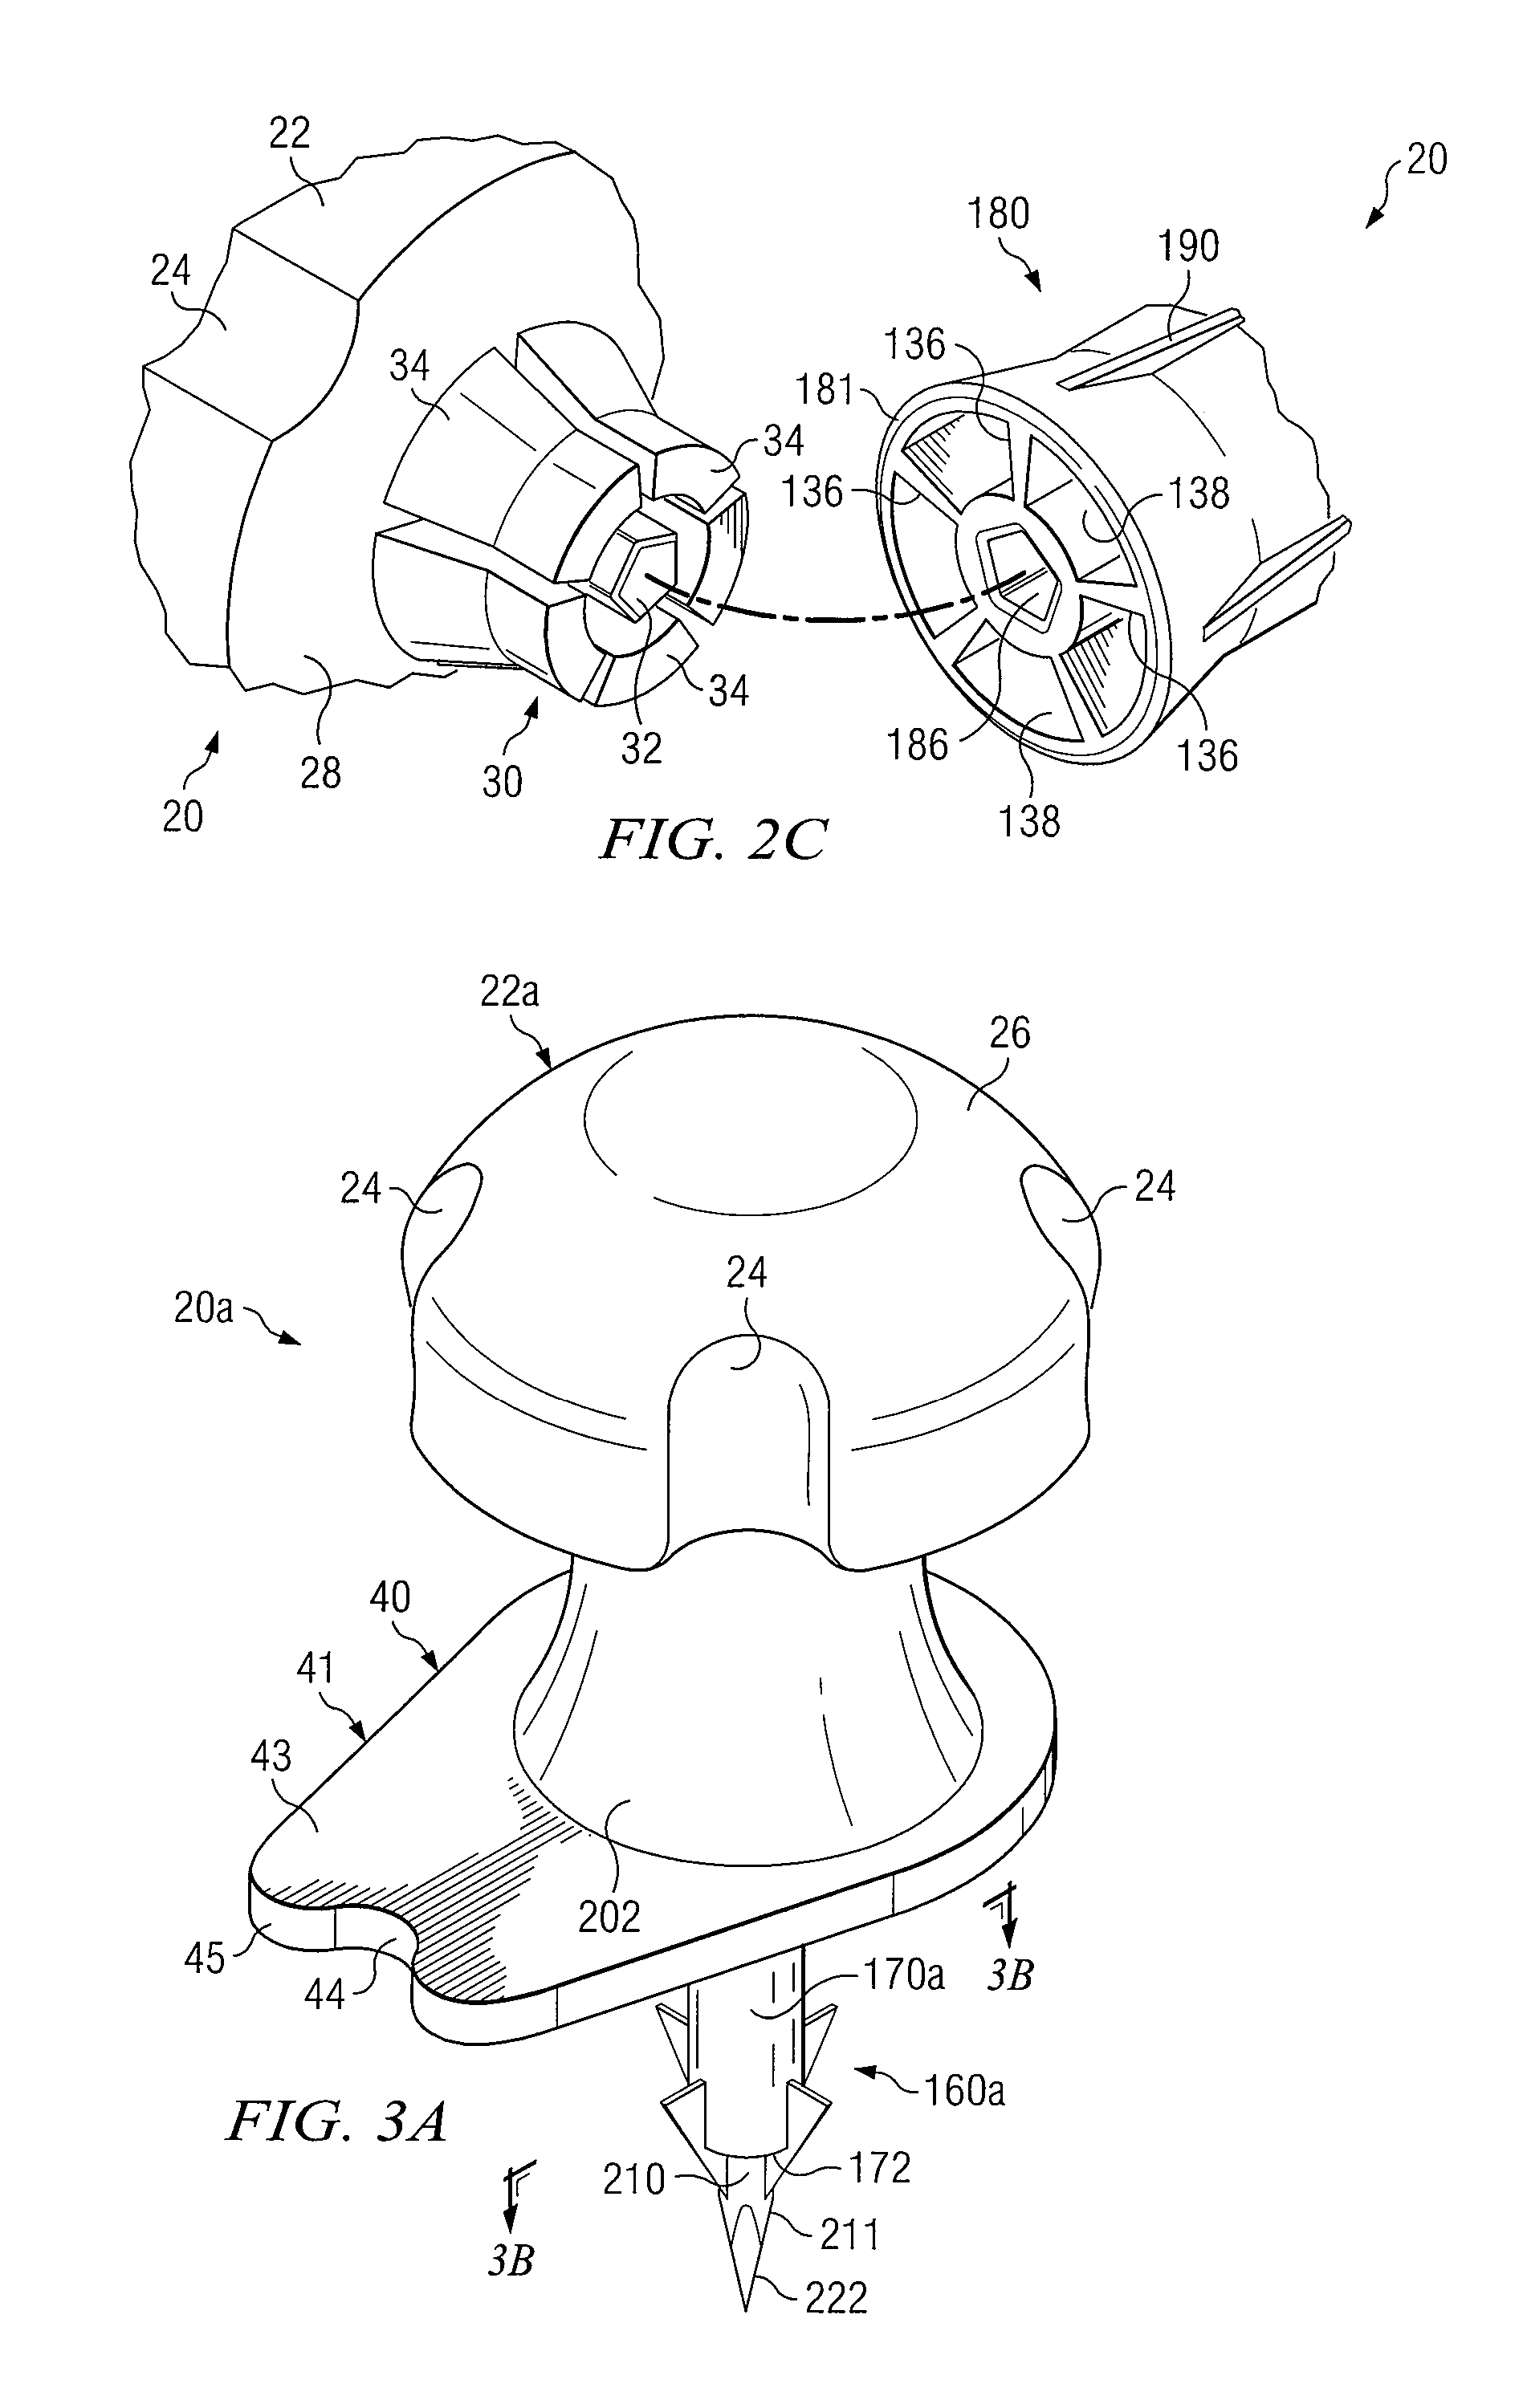 Intraosseous Device And Methods For Accessing Bone Marrow In The Sternum And Other Target Areas